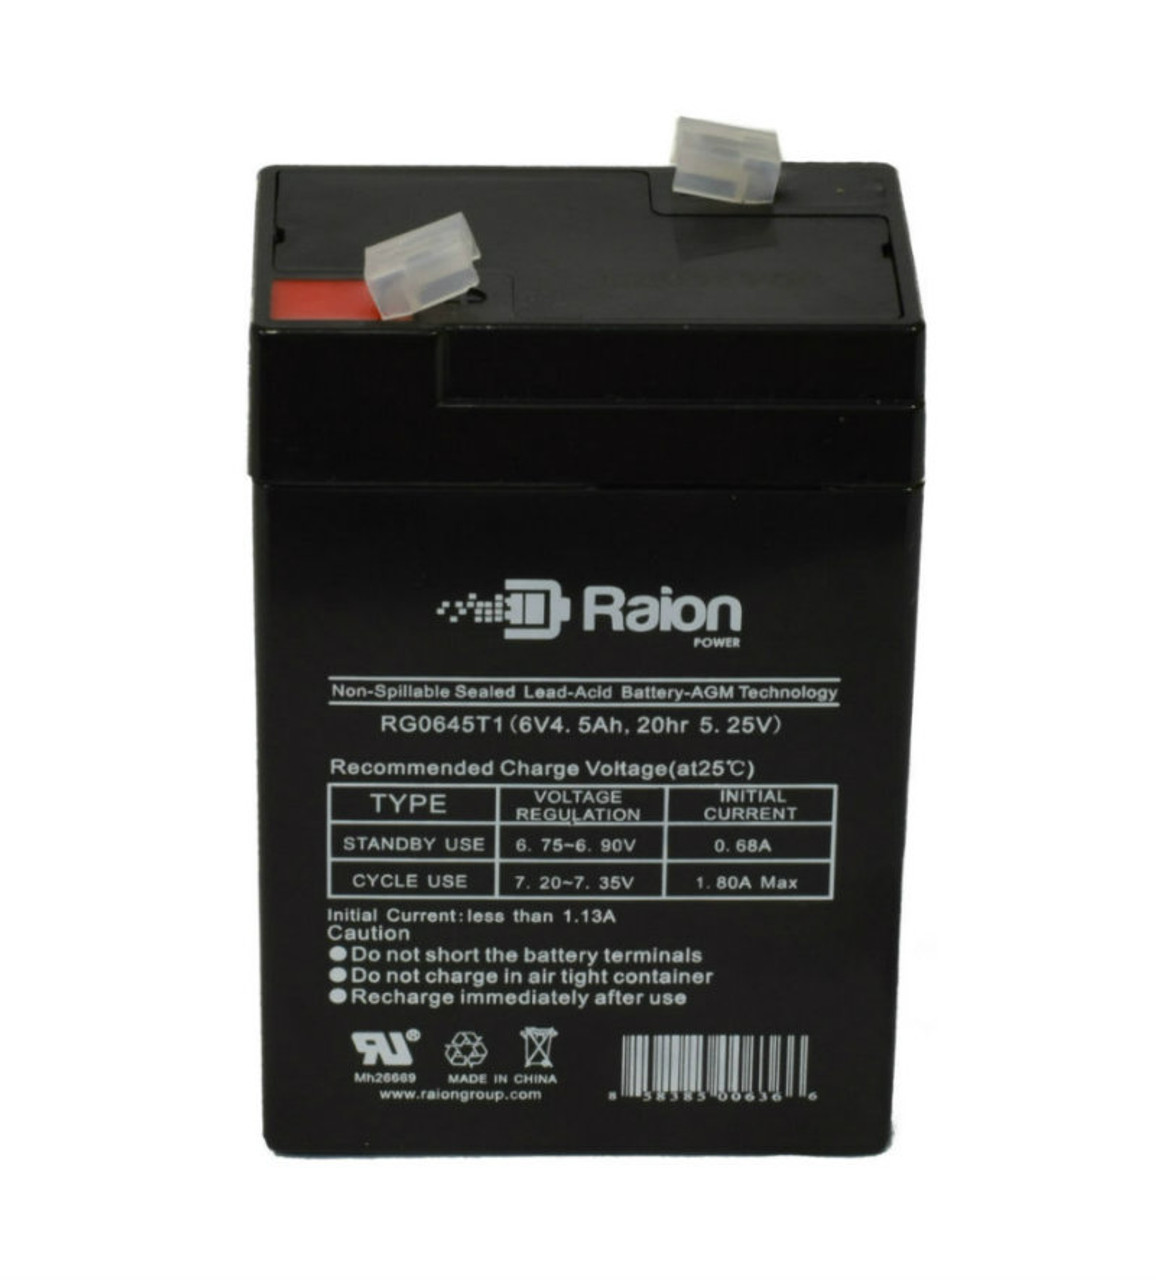 Raion Power RG0645T1 Replacement Battery Cartridge for R&D 5374